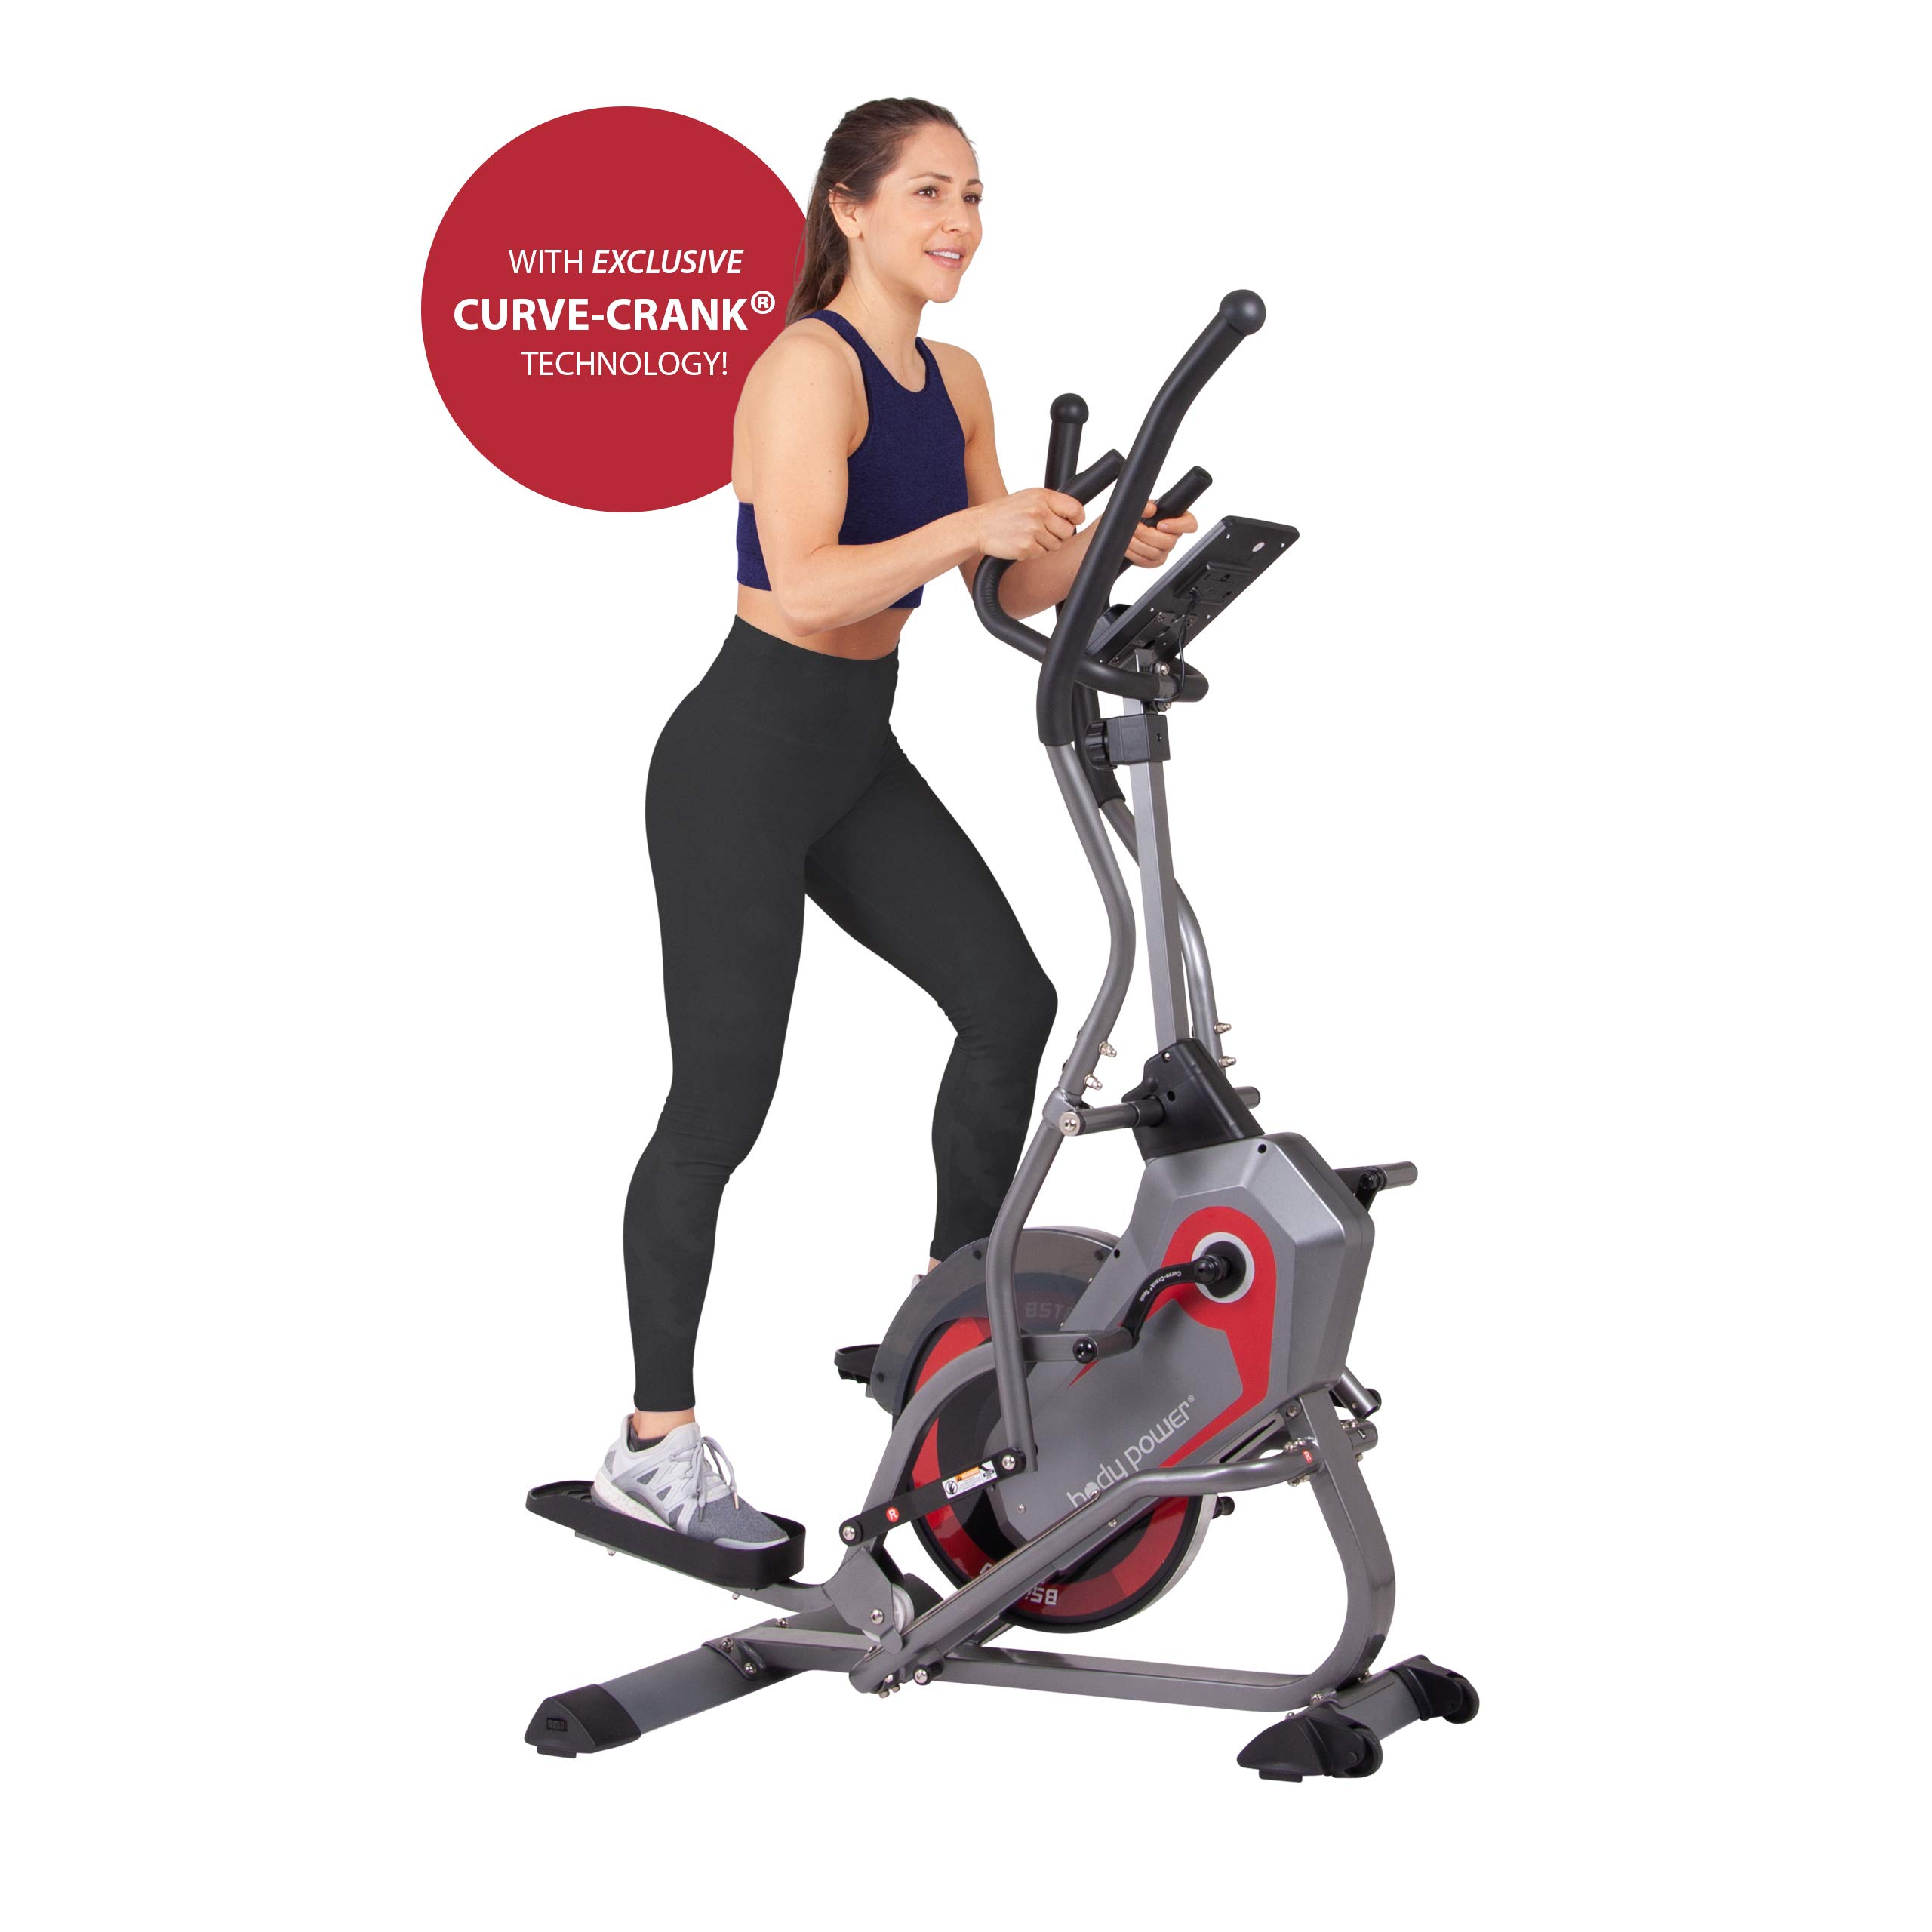 2-in-1 Elliptical Stepper Trainer with Curve-Crank